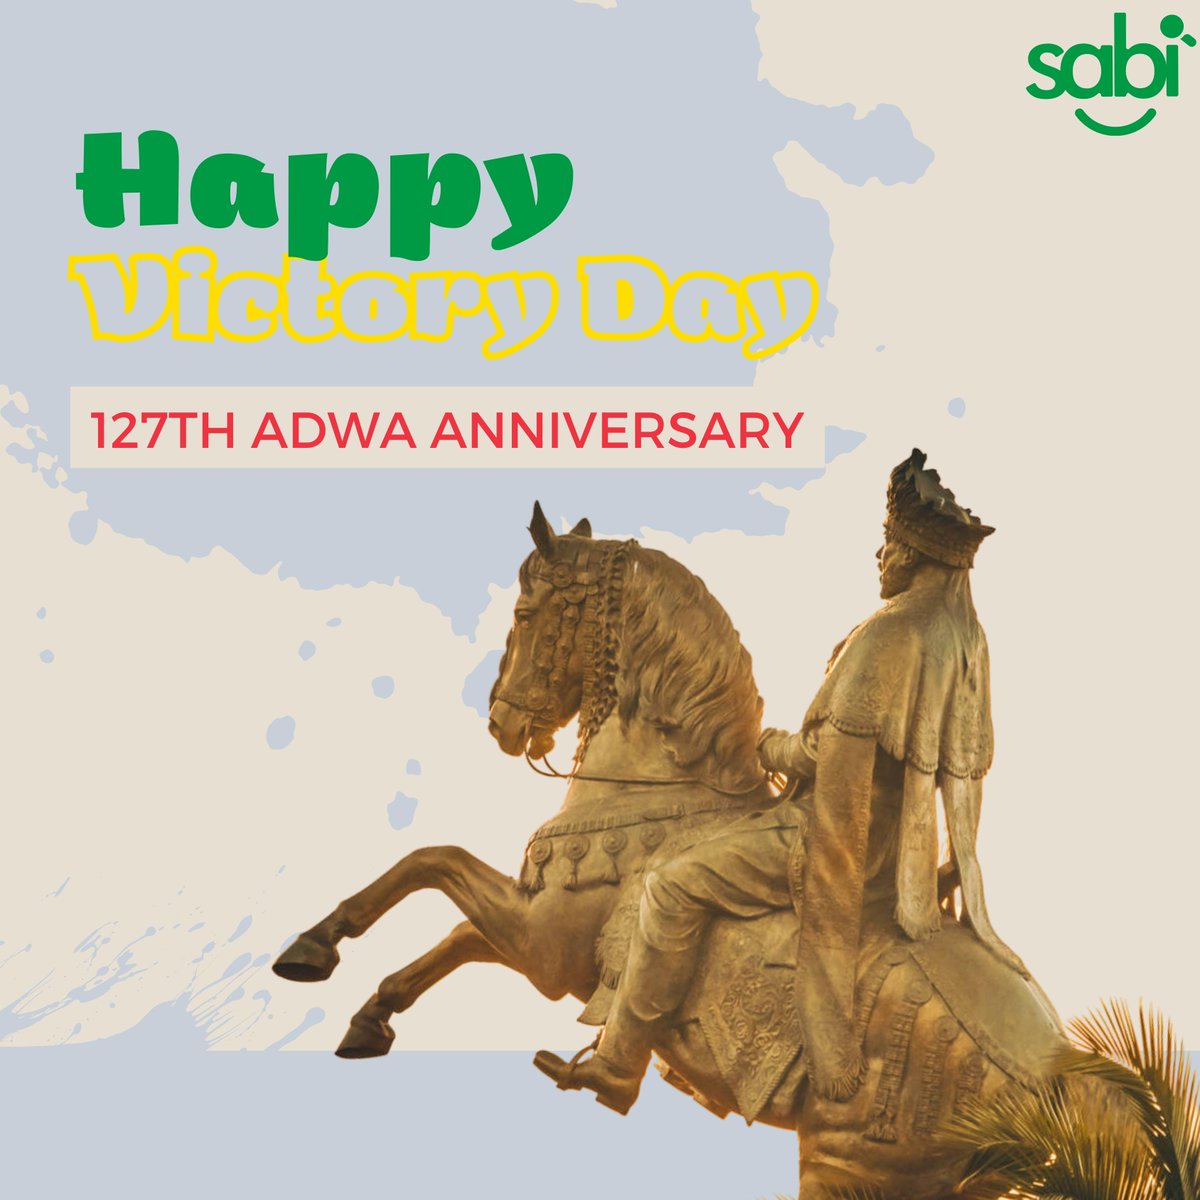 Today, we celebrate the triumph of Adwa and the resilient spirit of Africa! As we continue to empower startups with affordable and vetted tech talent sourced from the continent, we honor the legacy of those who fought for our freedom. #sabiworks #adwa #AfricanExcellence #Ethiopia